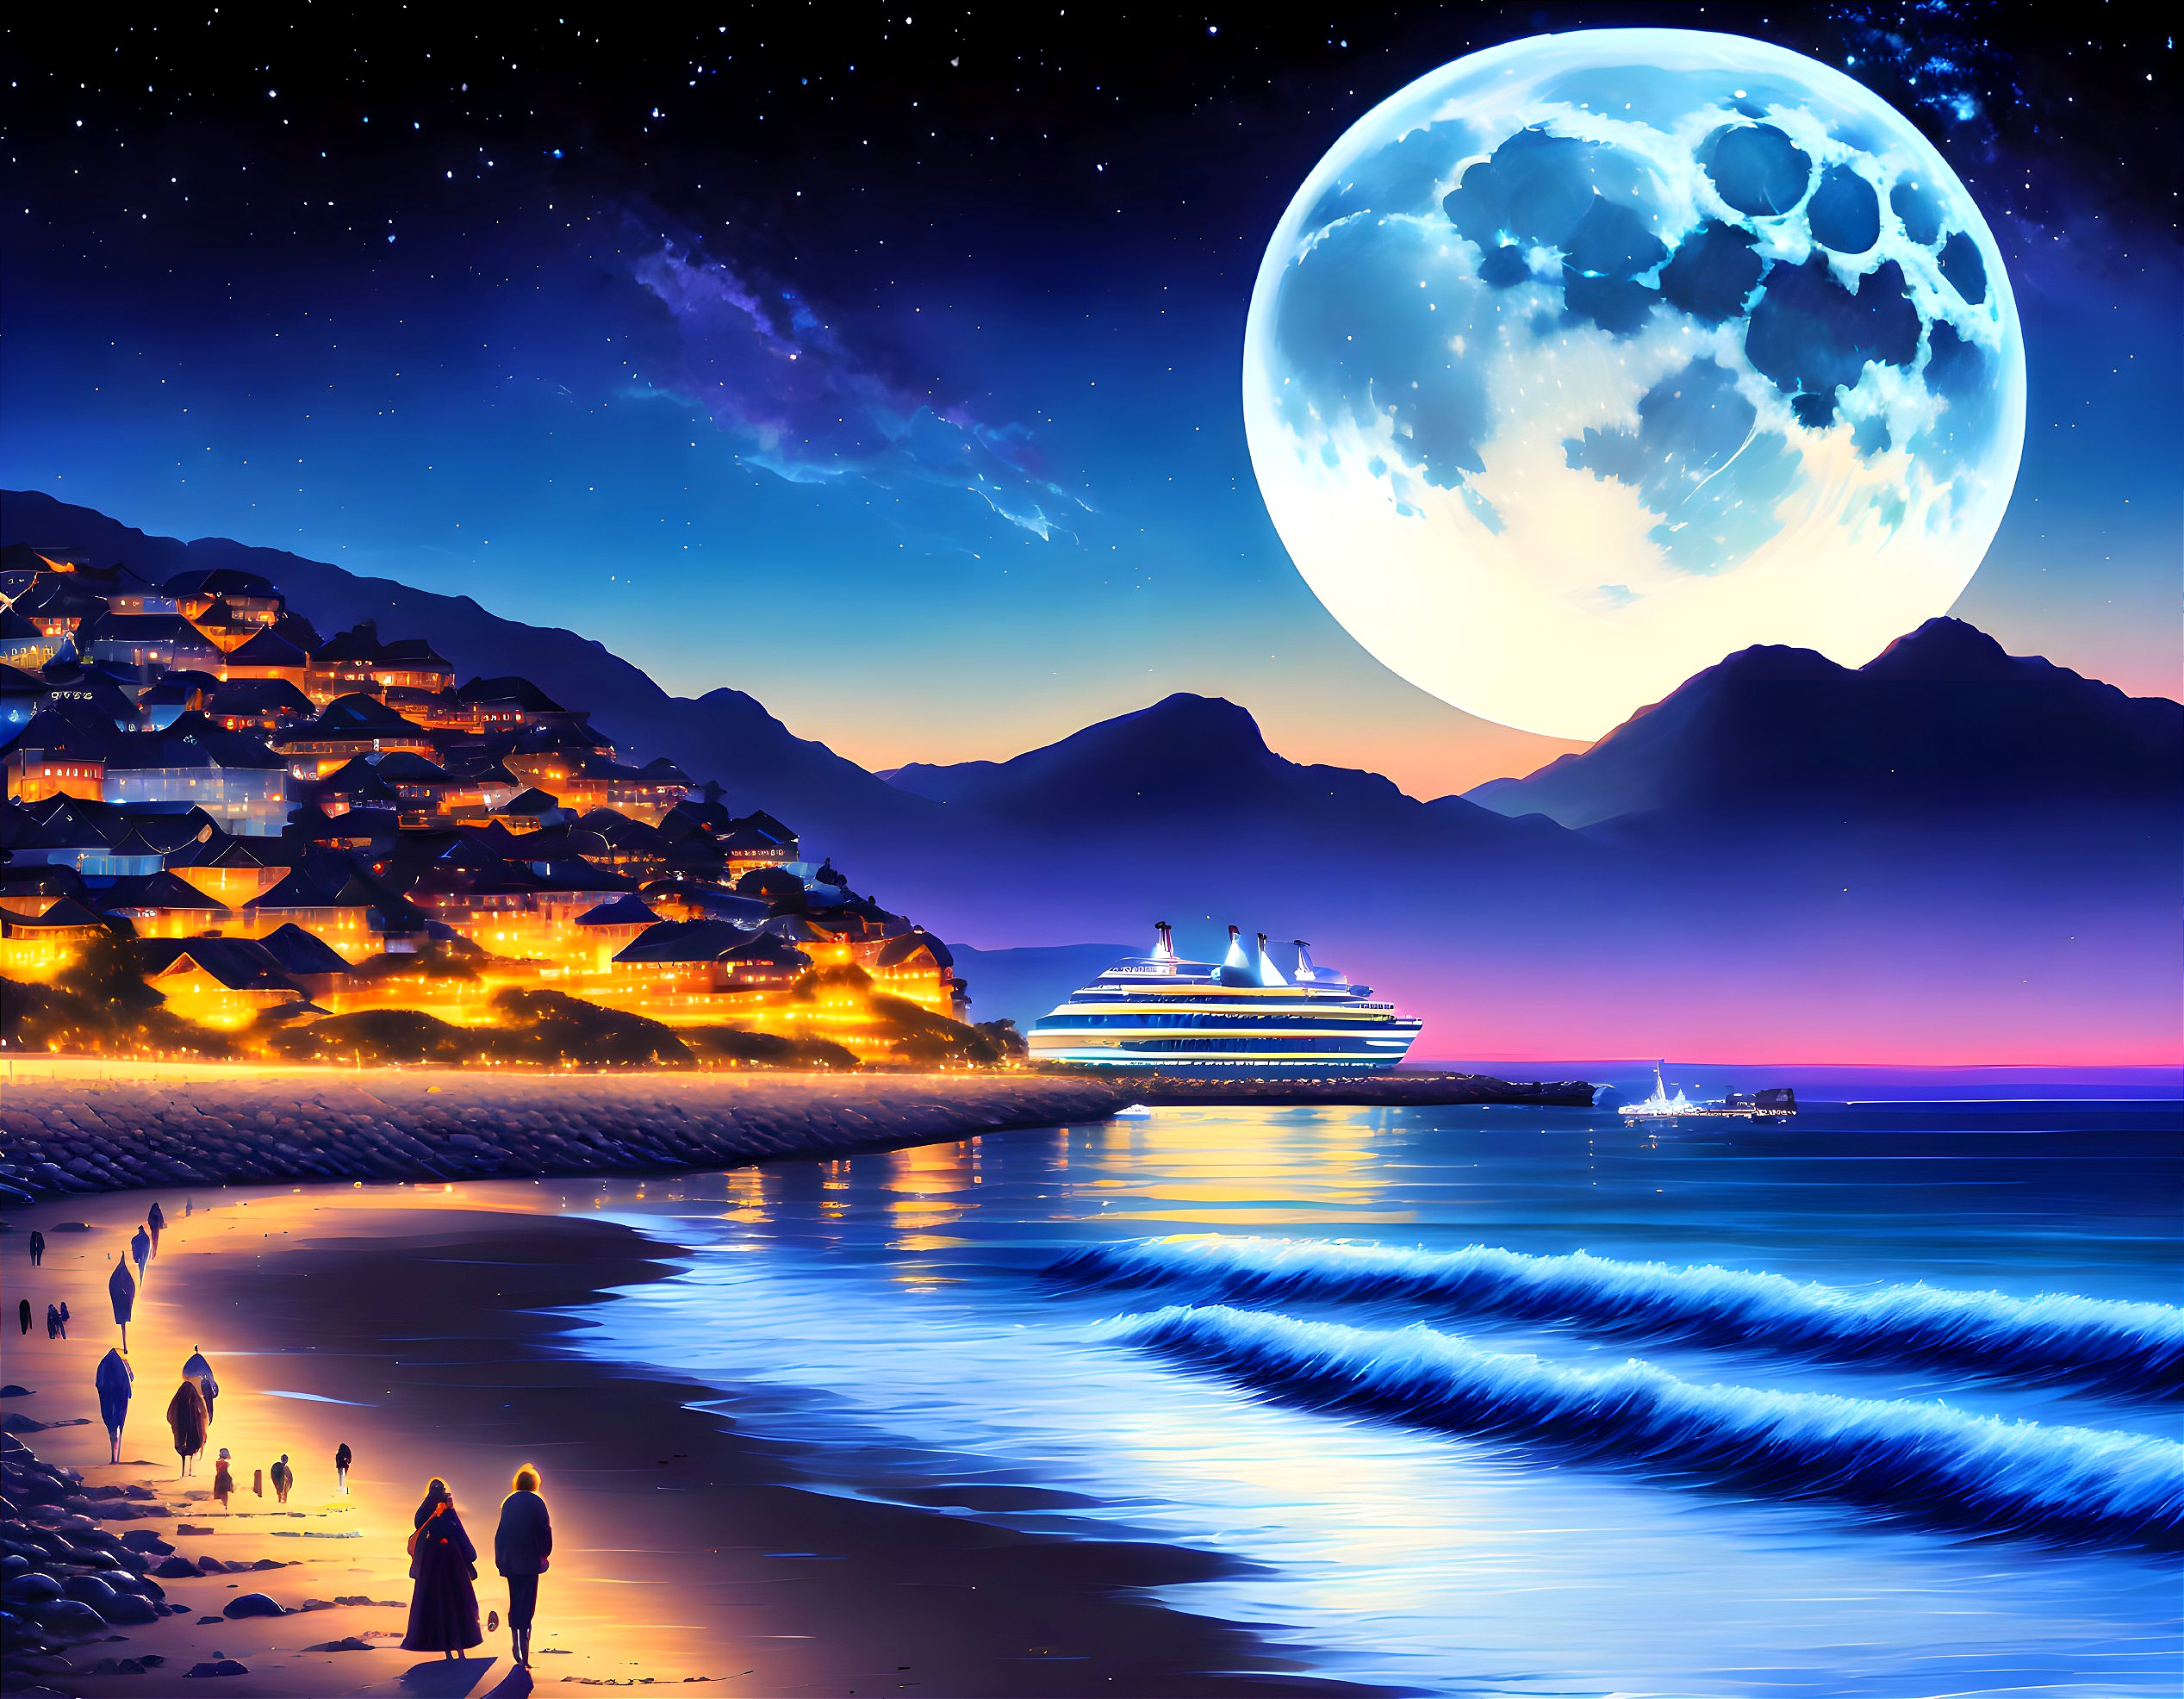 Seaside town illuminated by giant moon